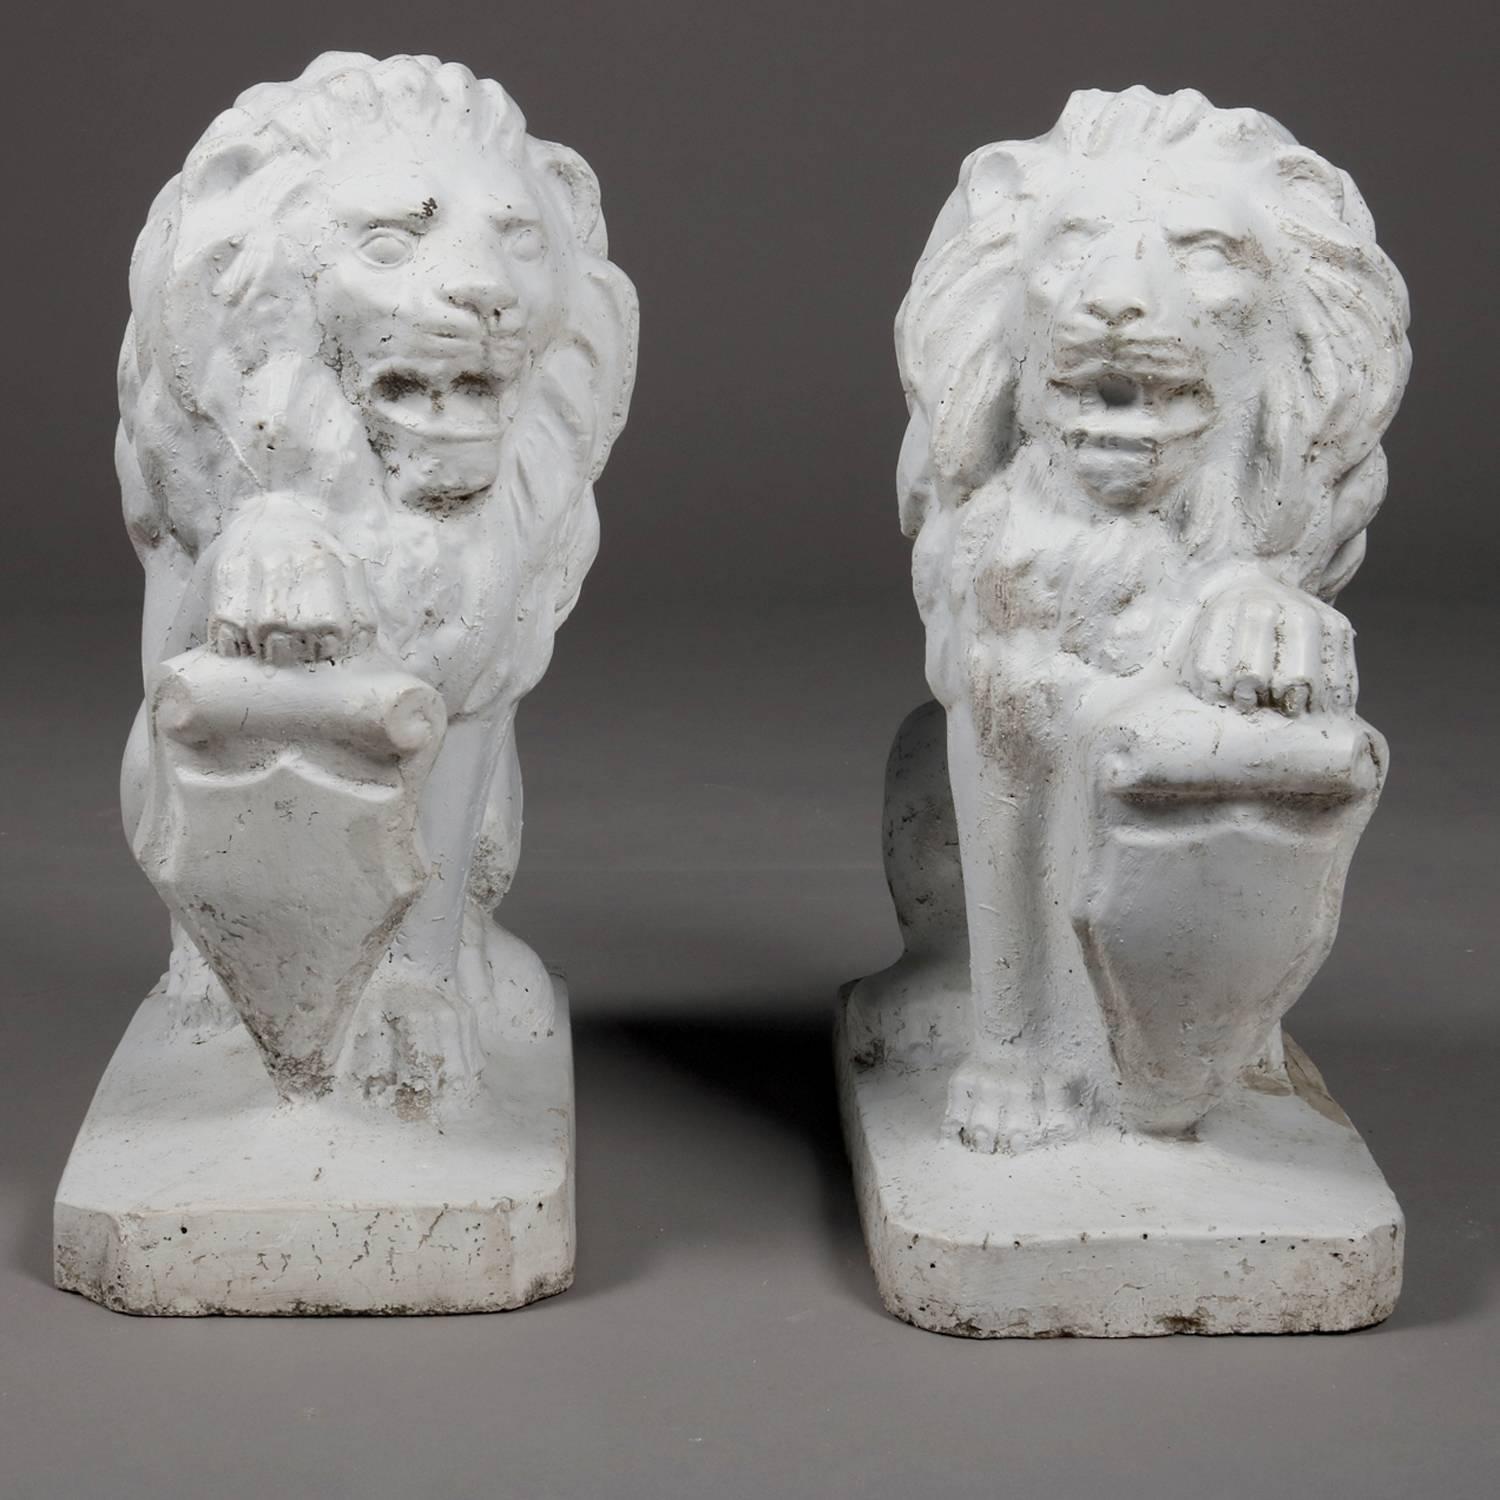 Pair of antique architectural figural concrete flanking driveway or garden gate sculptures of regal guardian lions with shields, 20th century.

Measures: 20